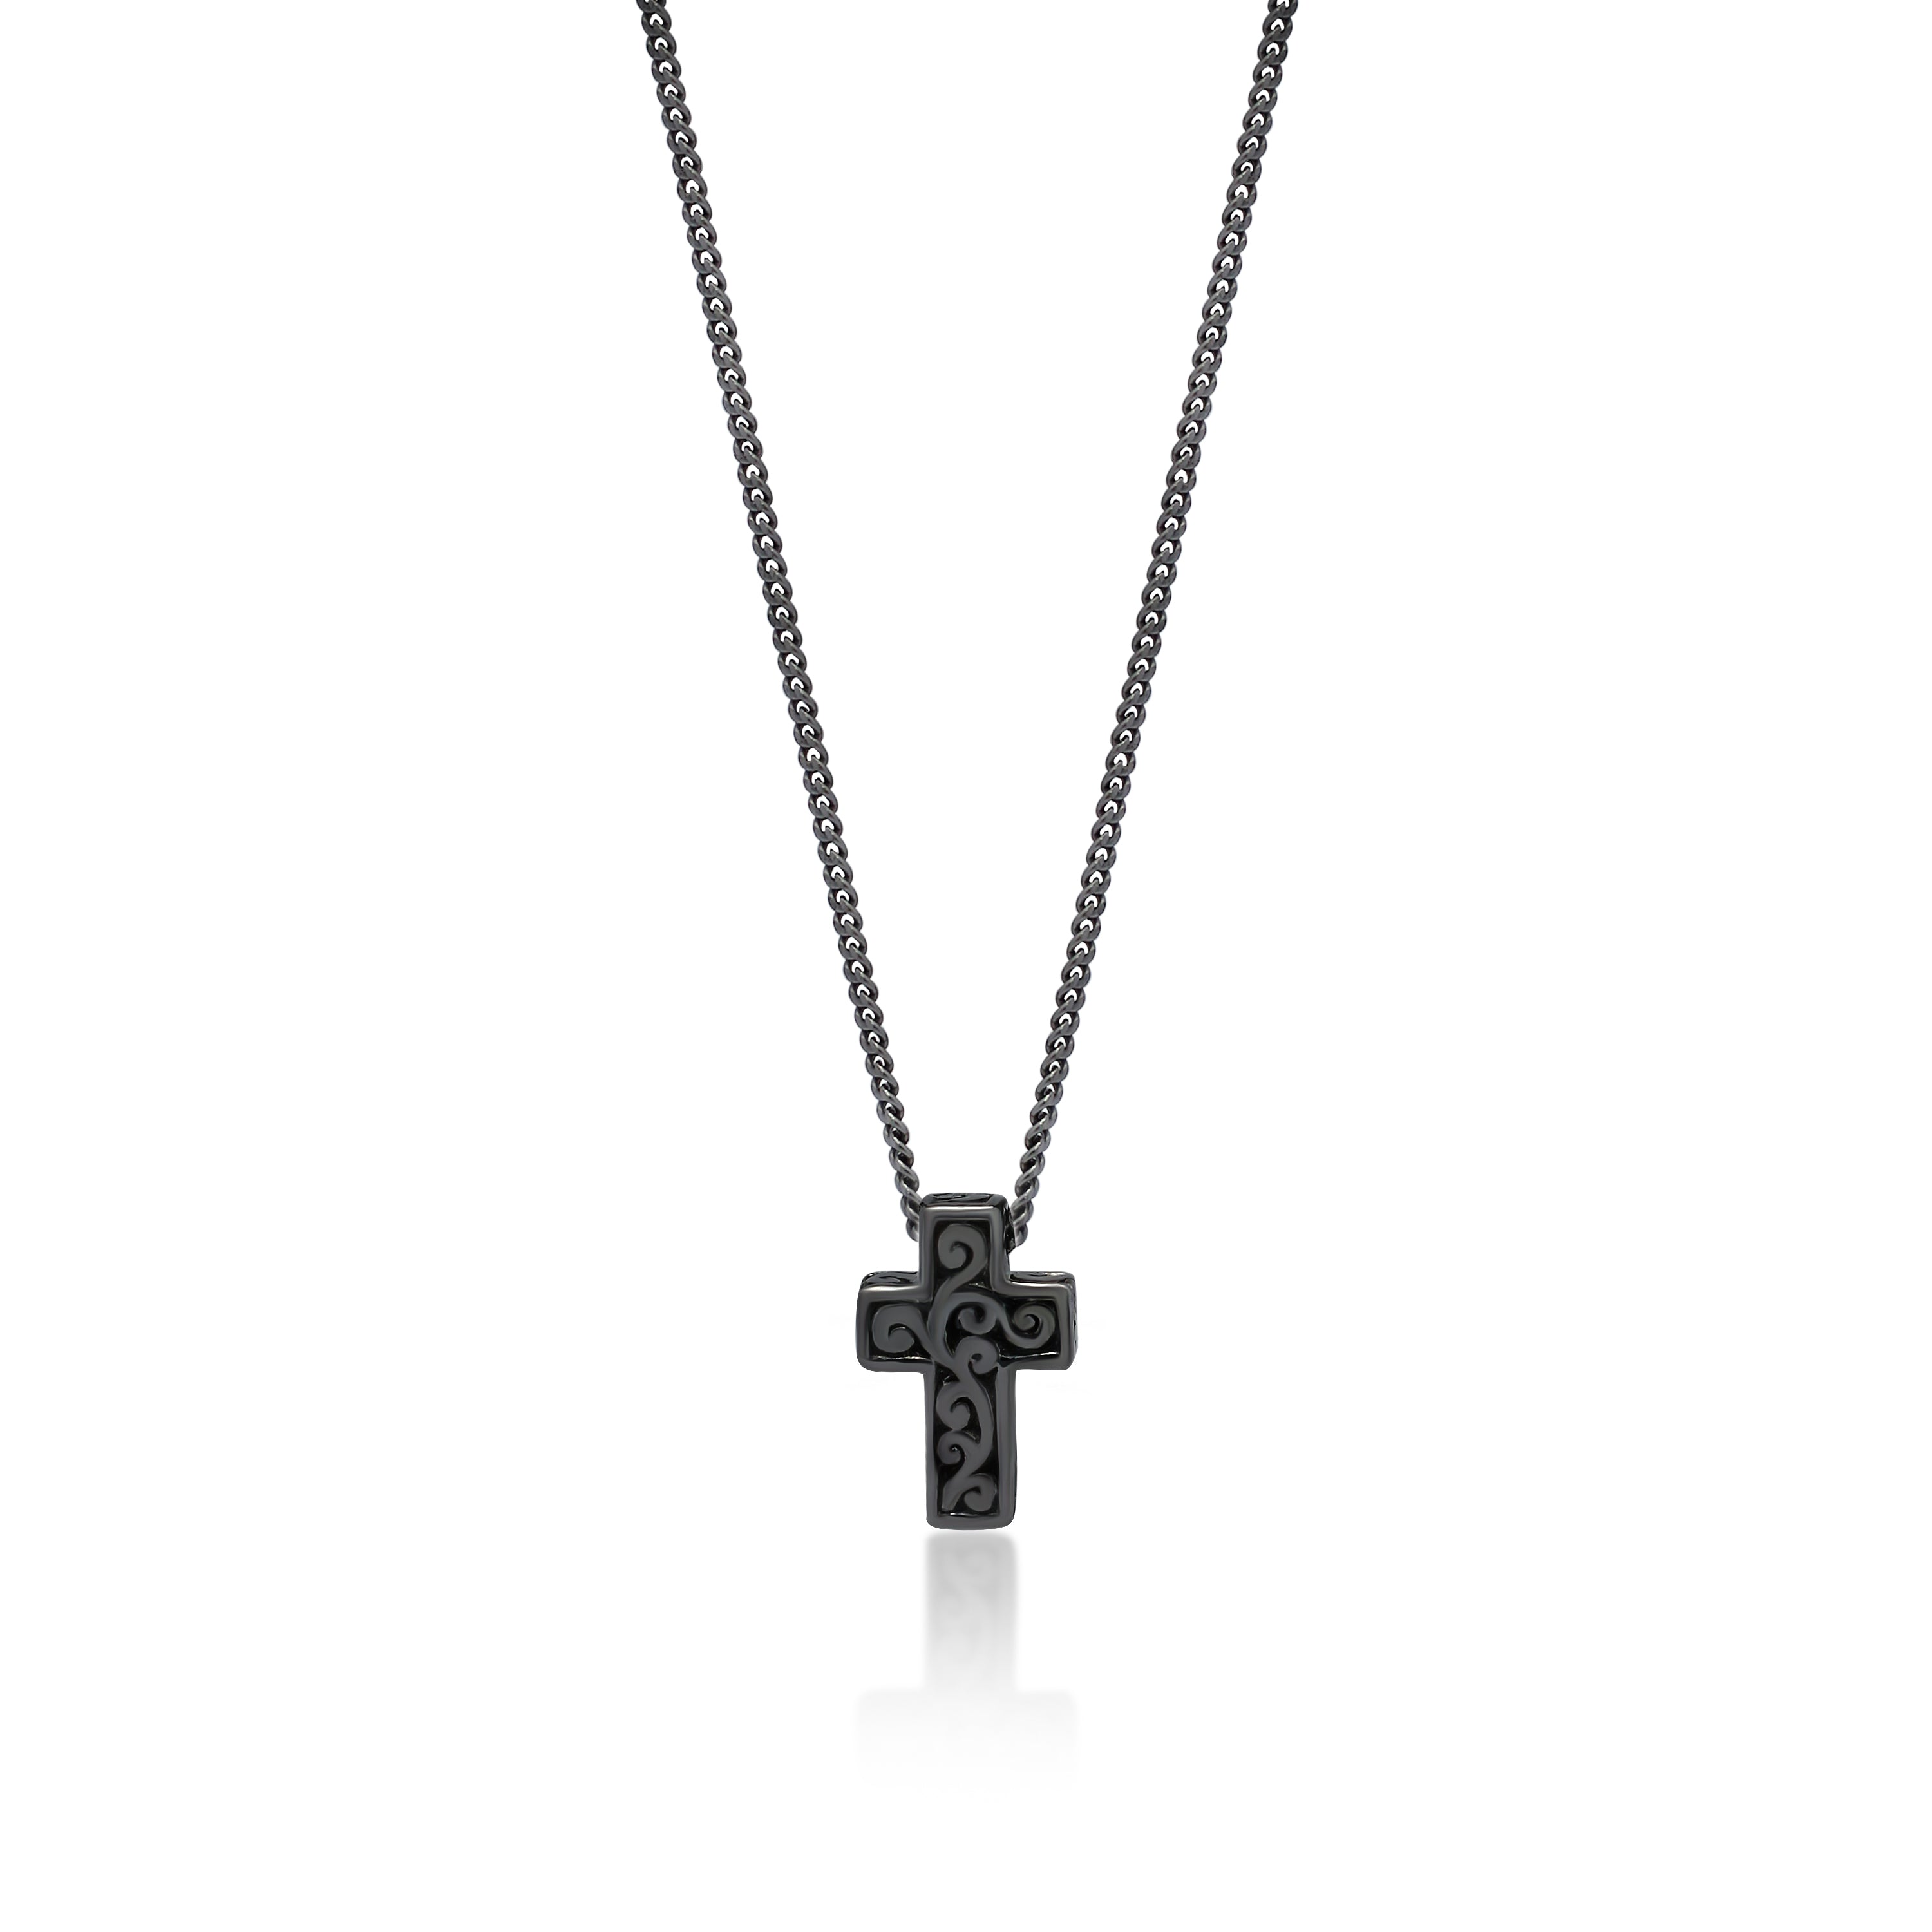 MAXFIELD PRIVATE COLLECTION | BYZANTINE CROSS NECKLACE